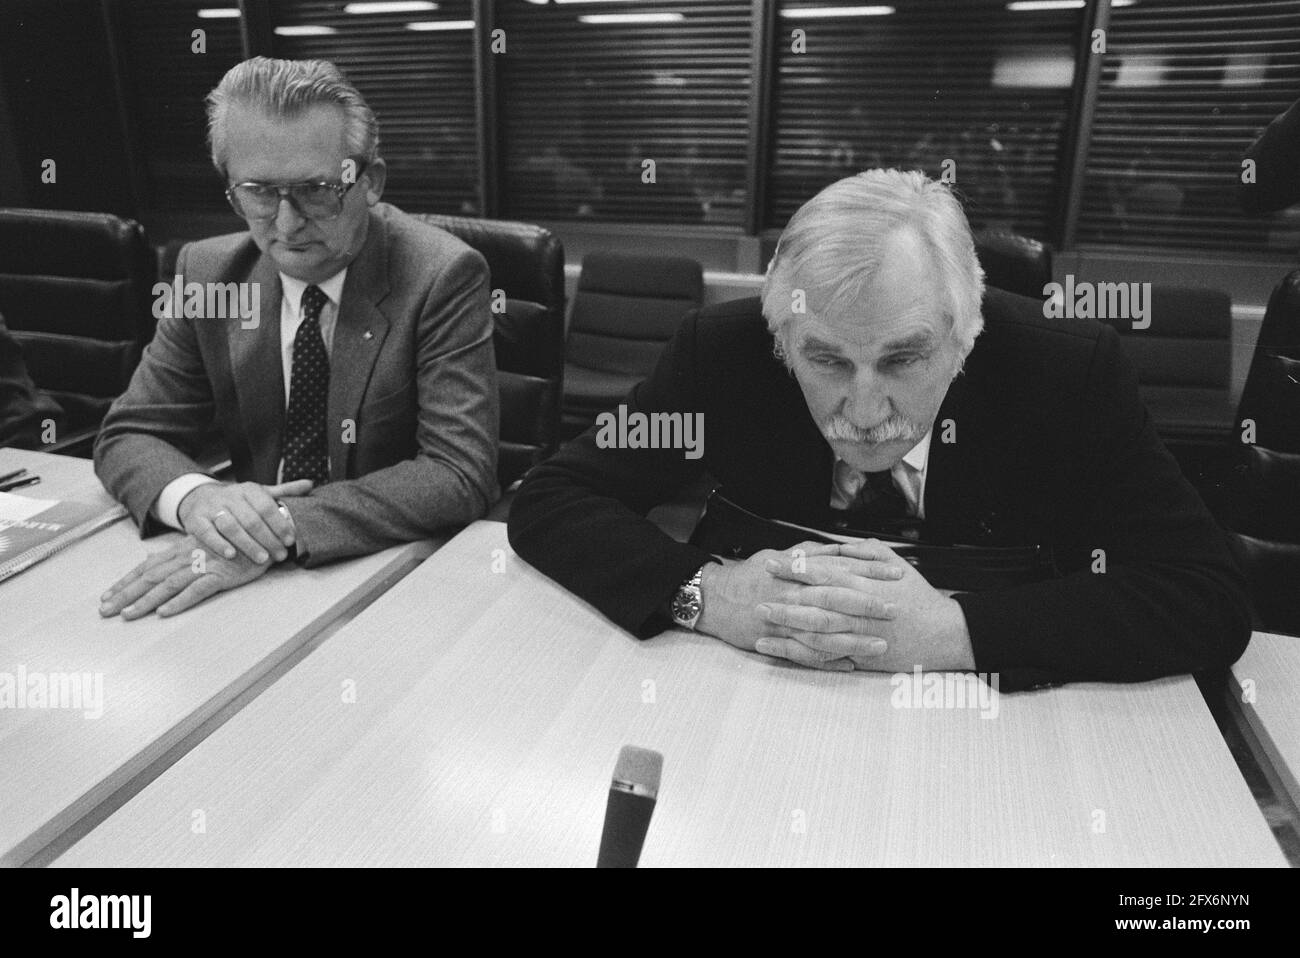 AbvaKabo president Jaap van der Scheur and president Christelijke Federatie voor Overheidspersoneel (CFO) T. de Jong (l), November 17, 1983, civil servants, meetings, wage and price policy, unions, presidents, The Netherlands, 20th century press agency photo, news to remember, documentary, historic photography 1945-1990, visual stories, human history of the Twentieth Century, capturing moments in time Stock Photo